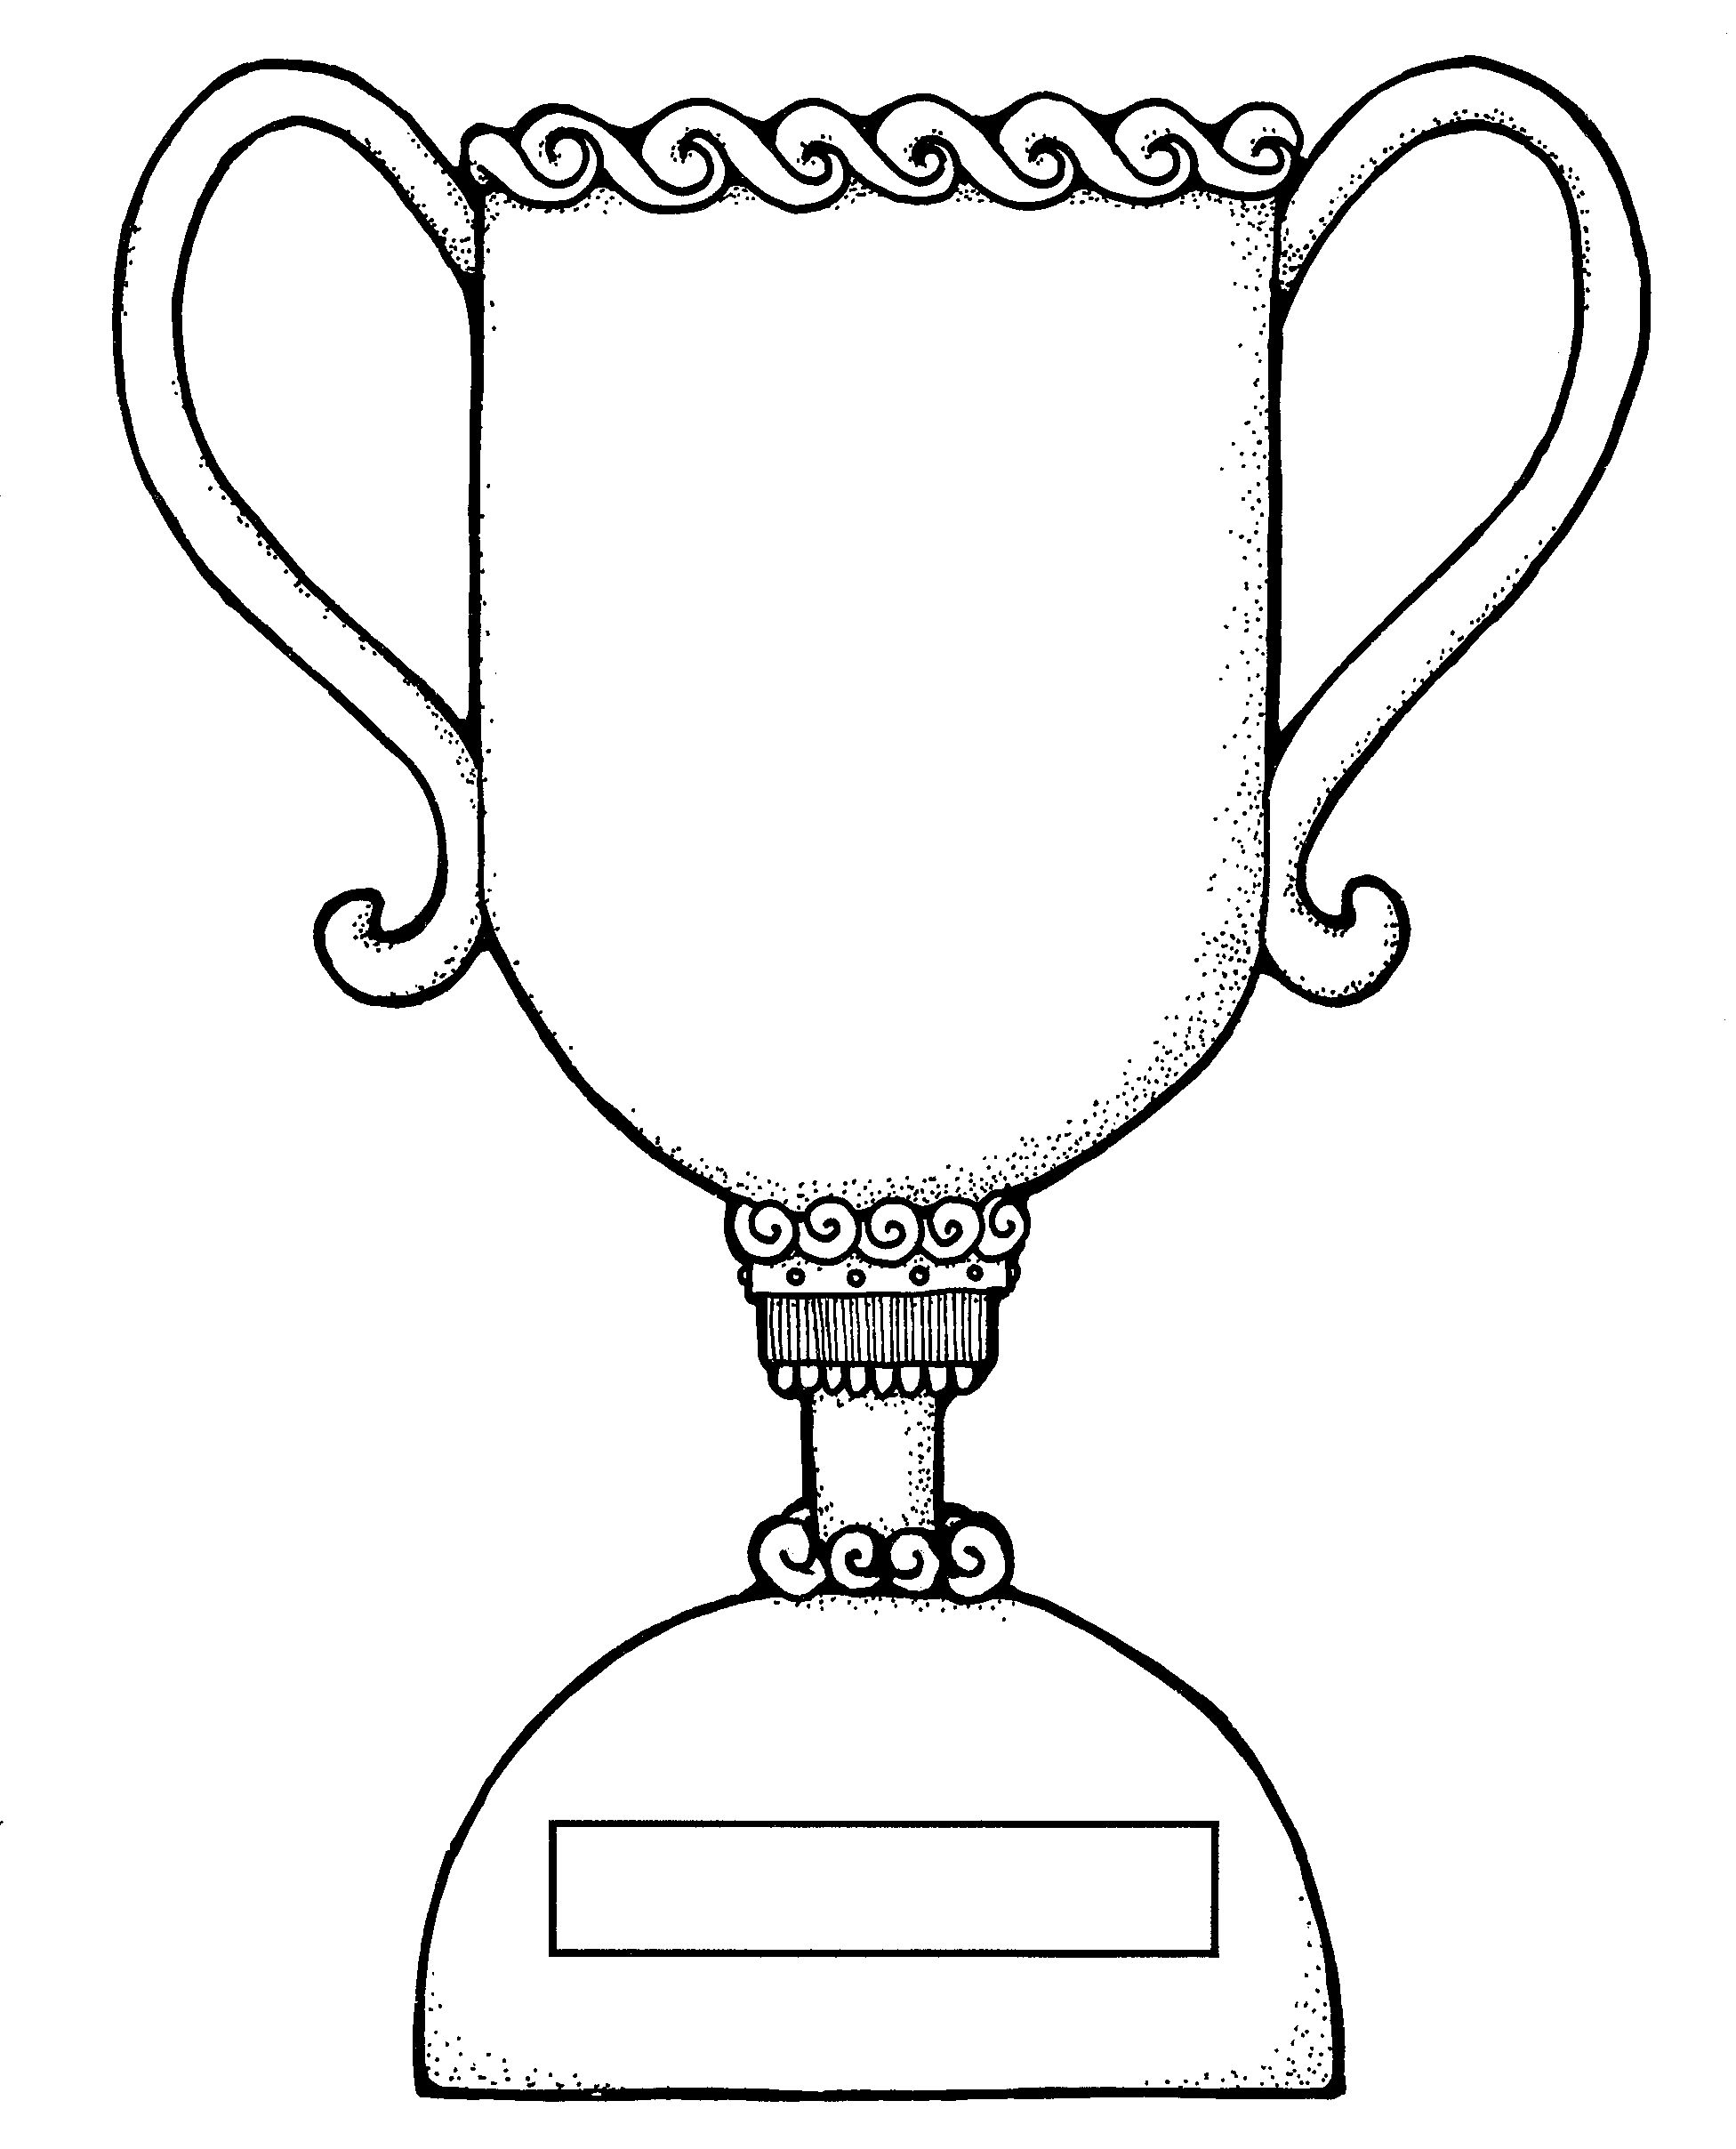 Cup for the winner